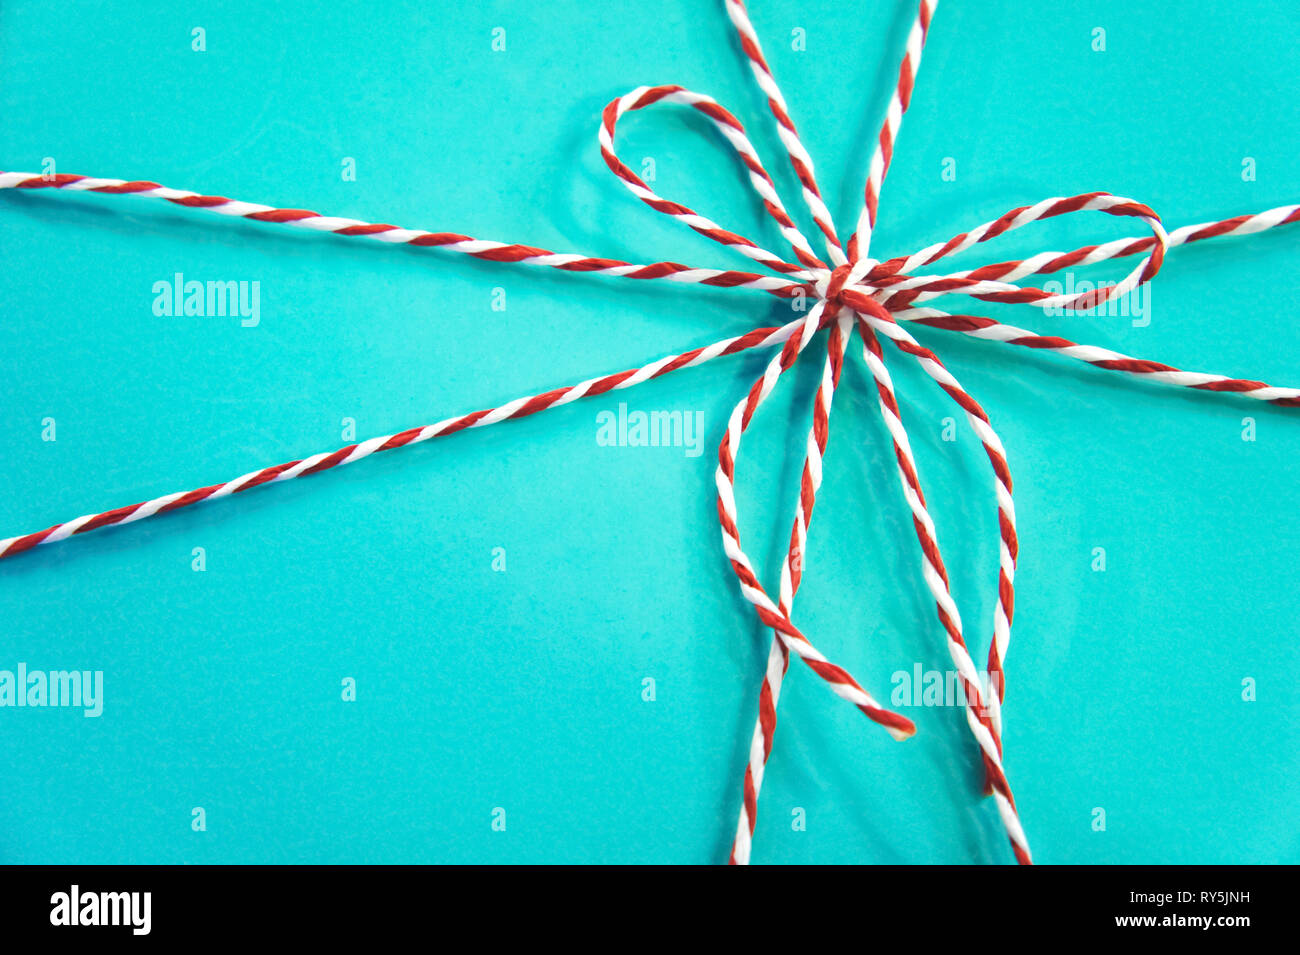 Red Twine String Tied In A Bow On Paper Backdrop Stock Photo